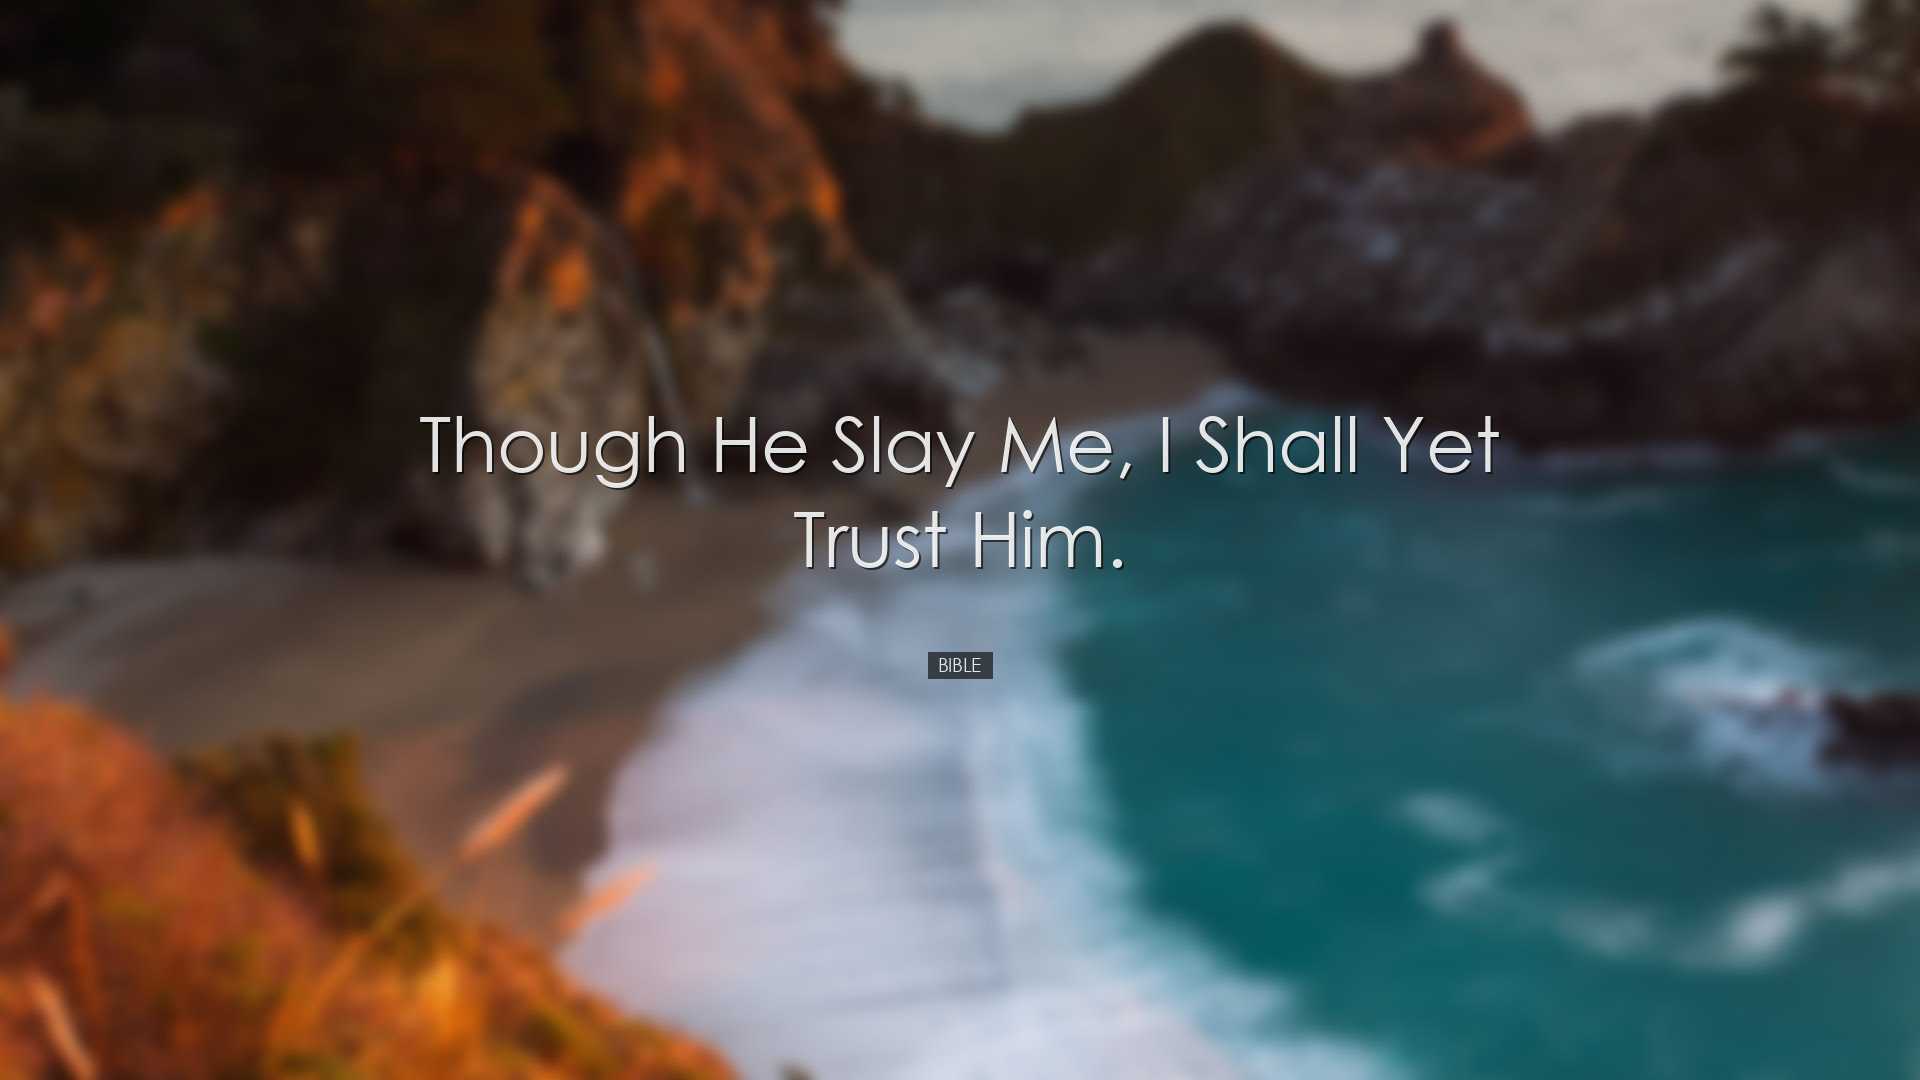 Though he slay me, I shall yet trust Him. - Bible